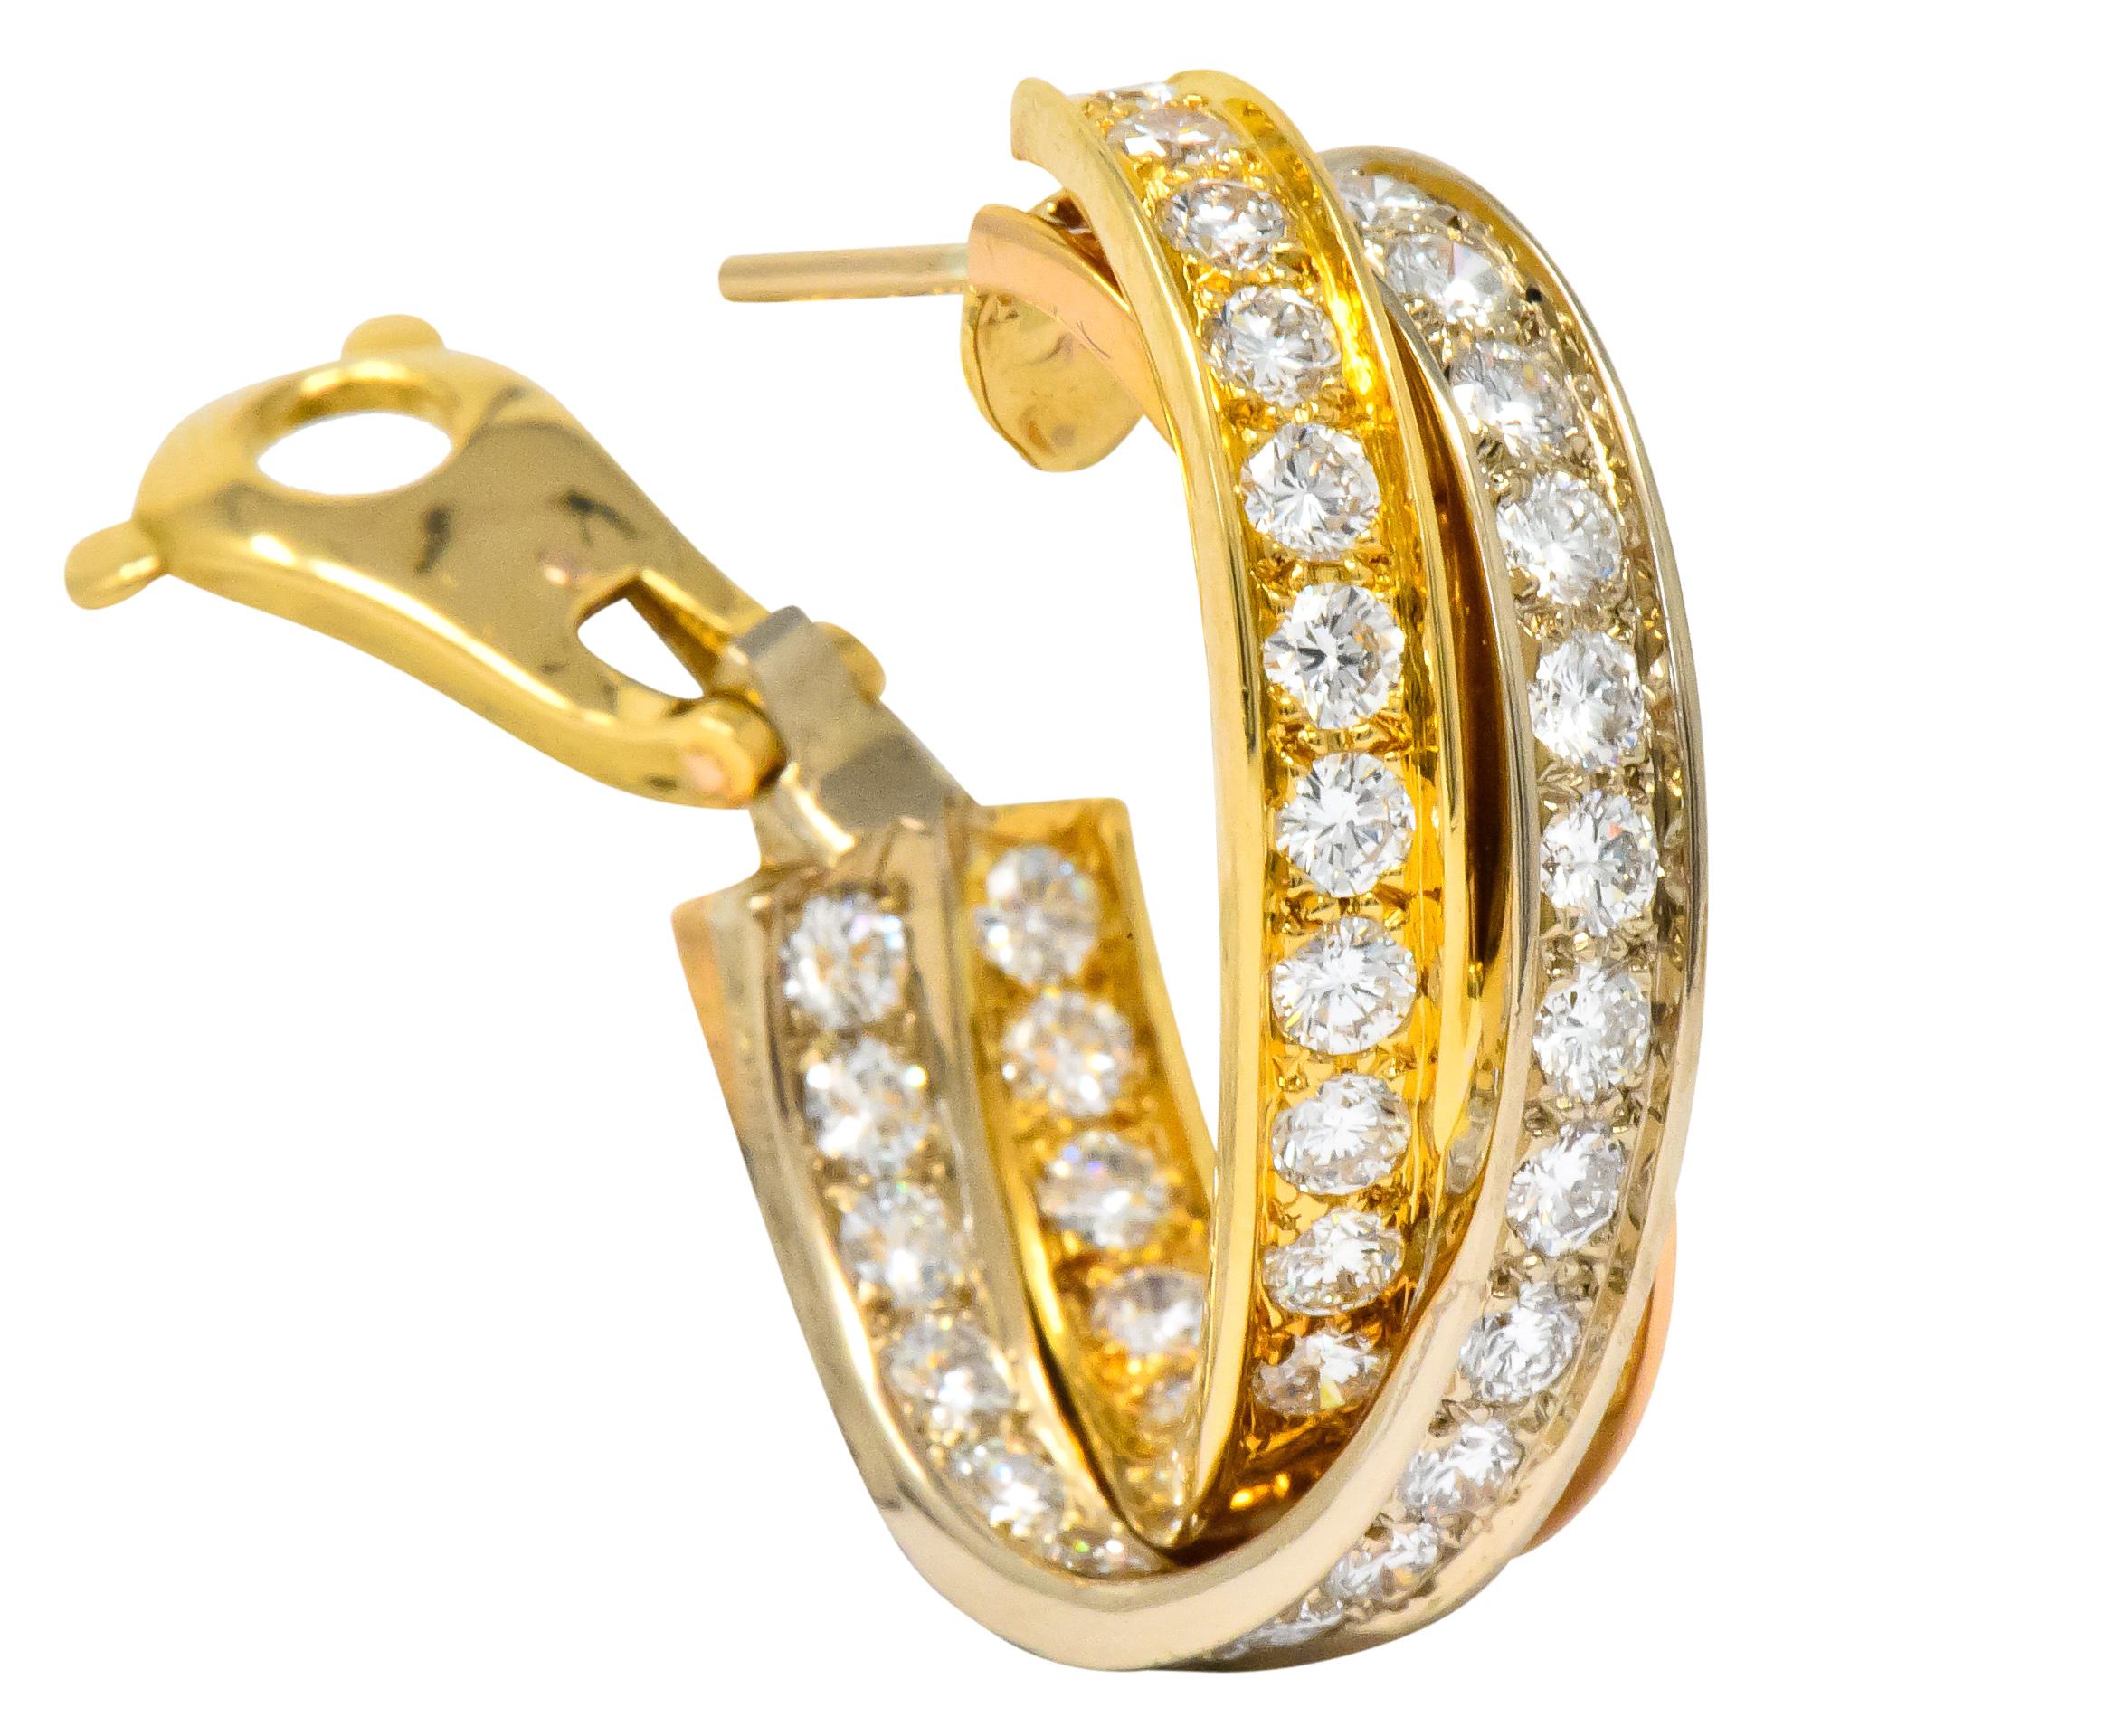 Half hoop design incorporating yellow gold, rose gold, and white gold intertwining channels

Each bead set with round brilliant cut diamonds weighing approximately 5.00 carats total, E/F color and VVS to VS clarity

From Cartier Trinity